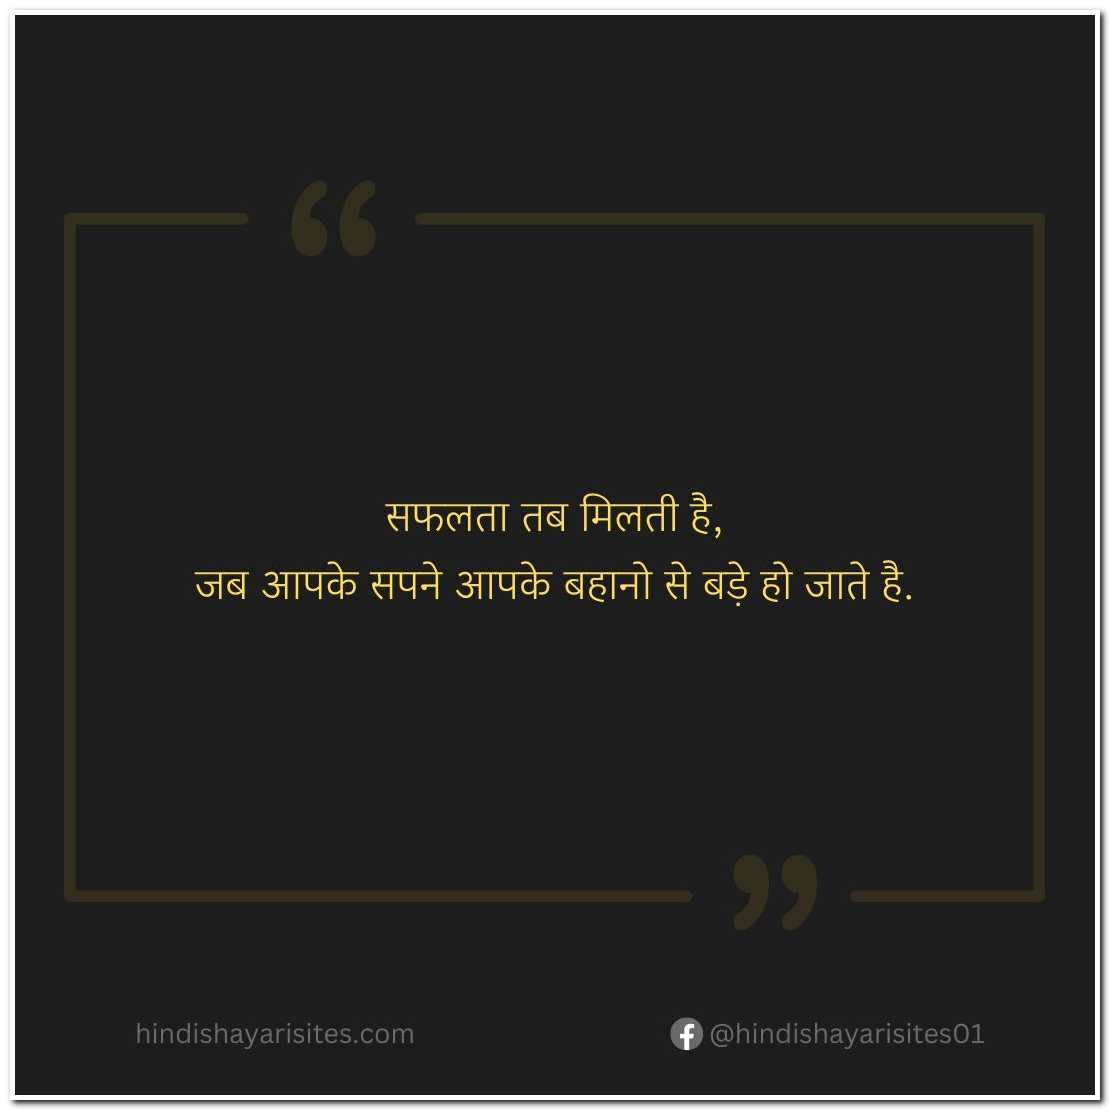 Thought Of The Day For Students In Hindi